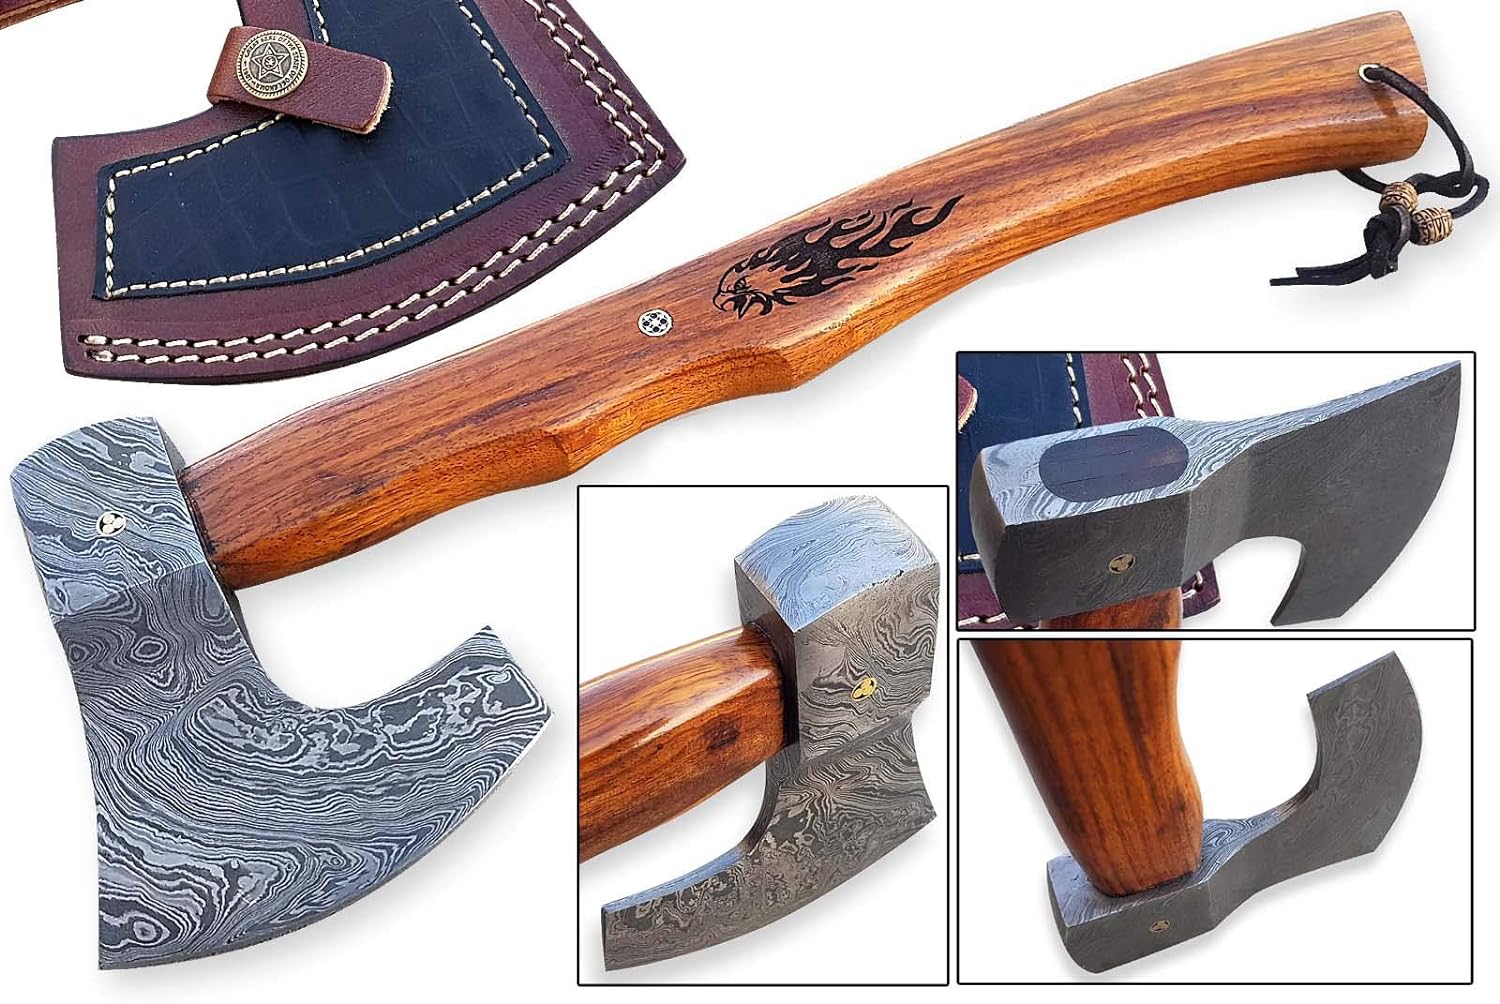 Damascus Steel Blade Axe Hatchet Tomahawk Hunting Knife with Real Leather Sheath